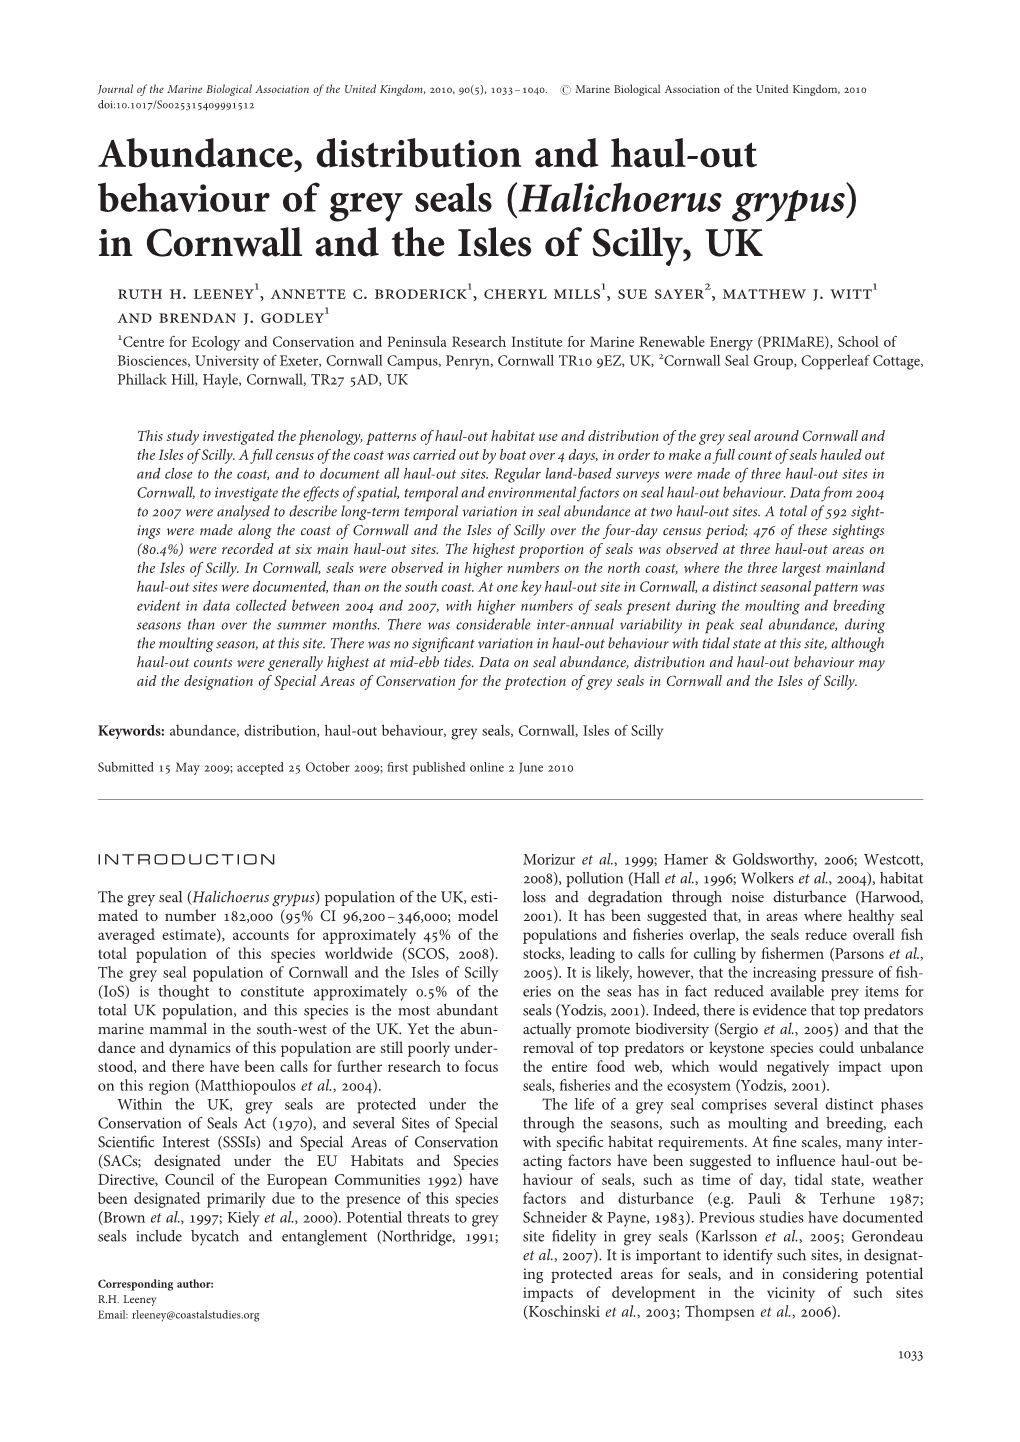 Abundance, Distribution and Haul-Out Behaviour of Grey Seals (Halichoerus Grypus) in Cornwall and the Isles of Scilly, UK Ruth H